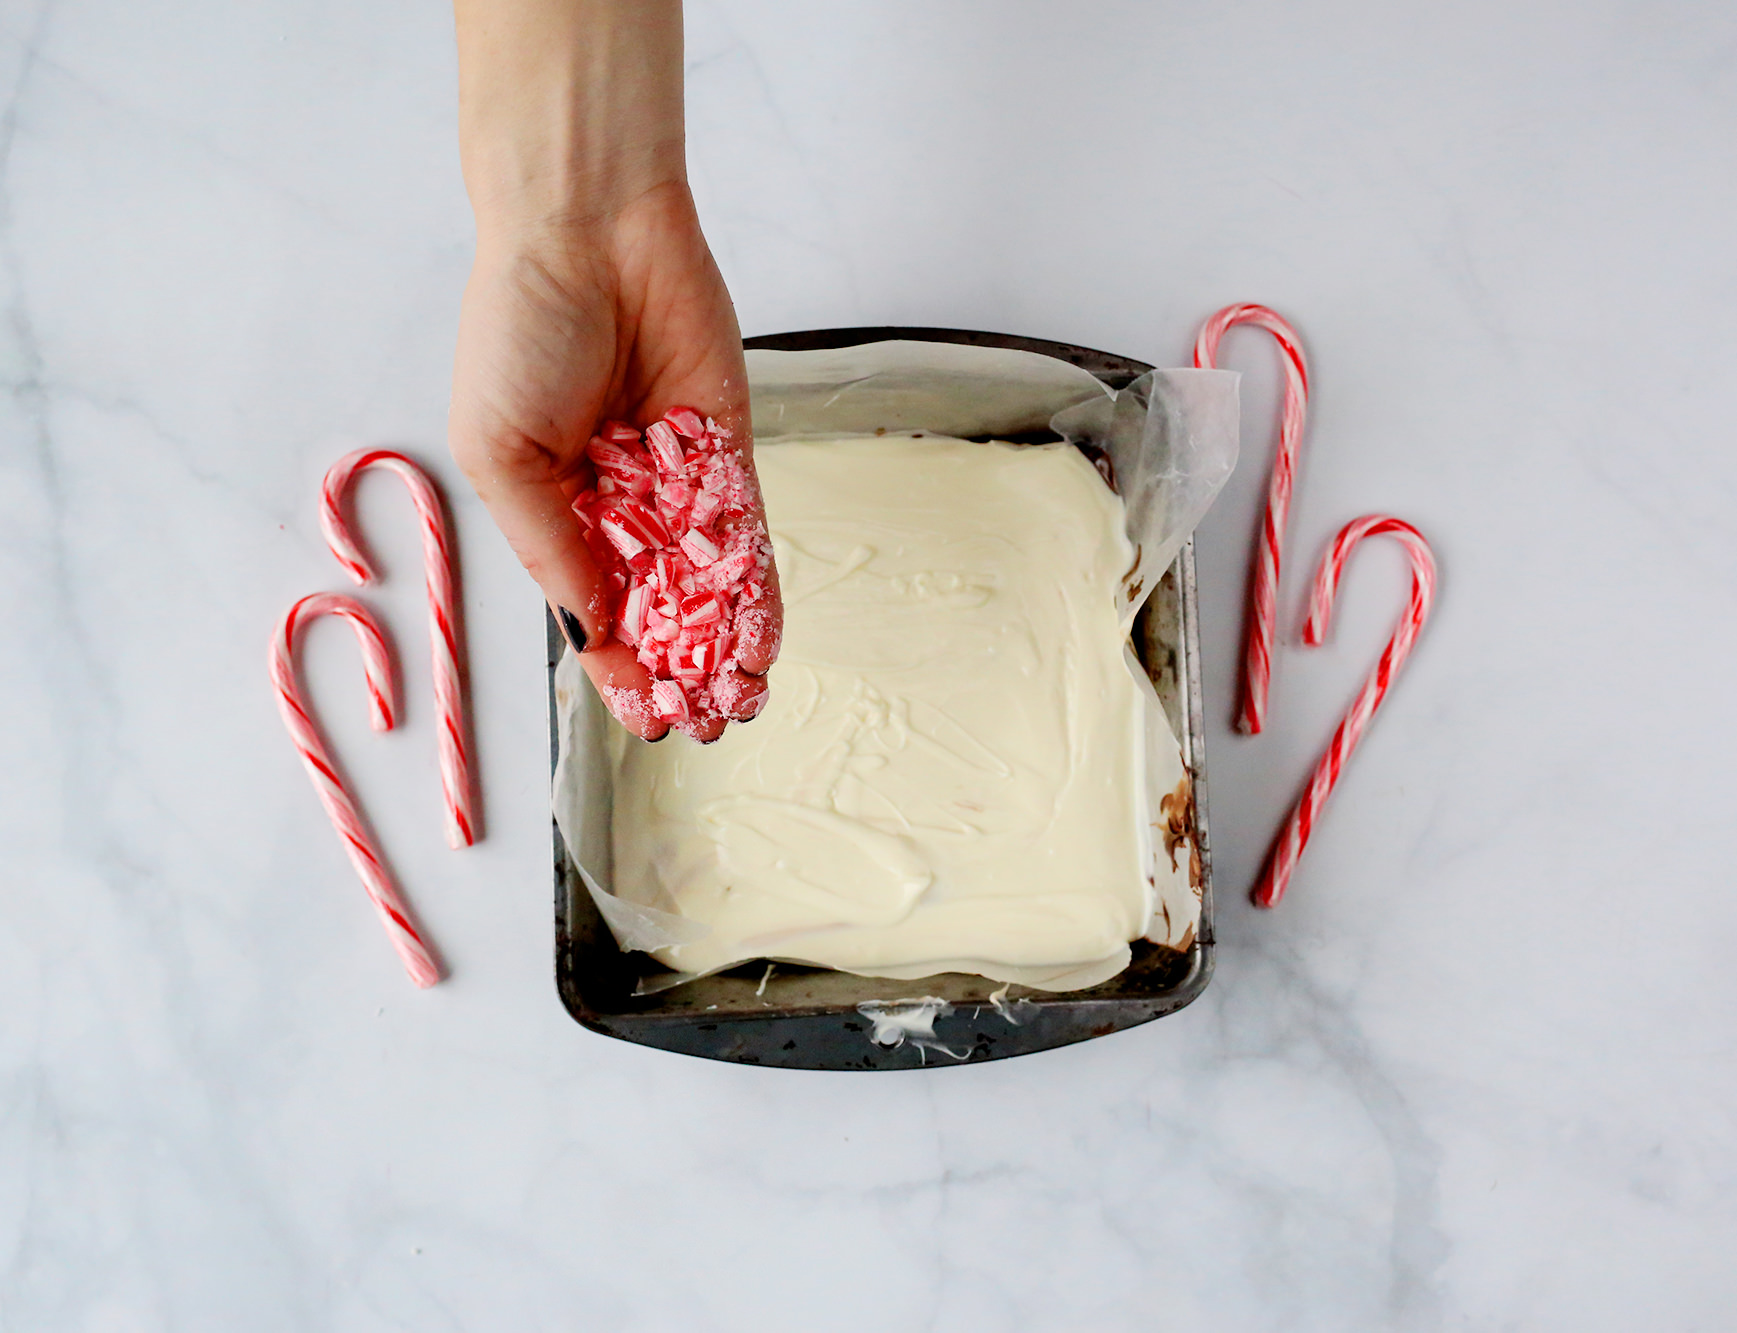 Crushed Peppermint over top of white chocolate makes for a perfect Christmas treat! Recipe via Lily & Val Living!